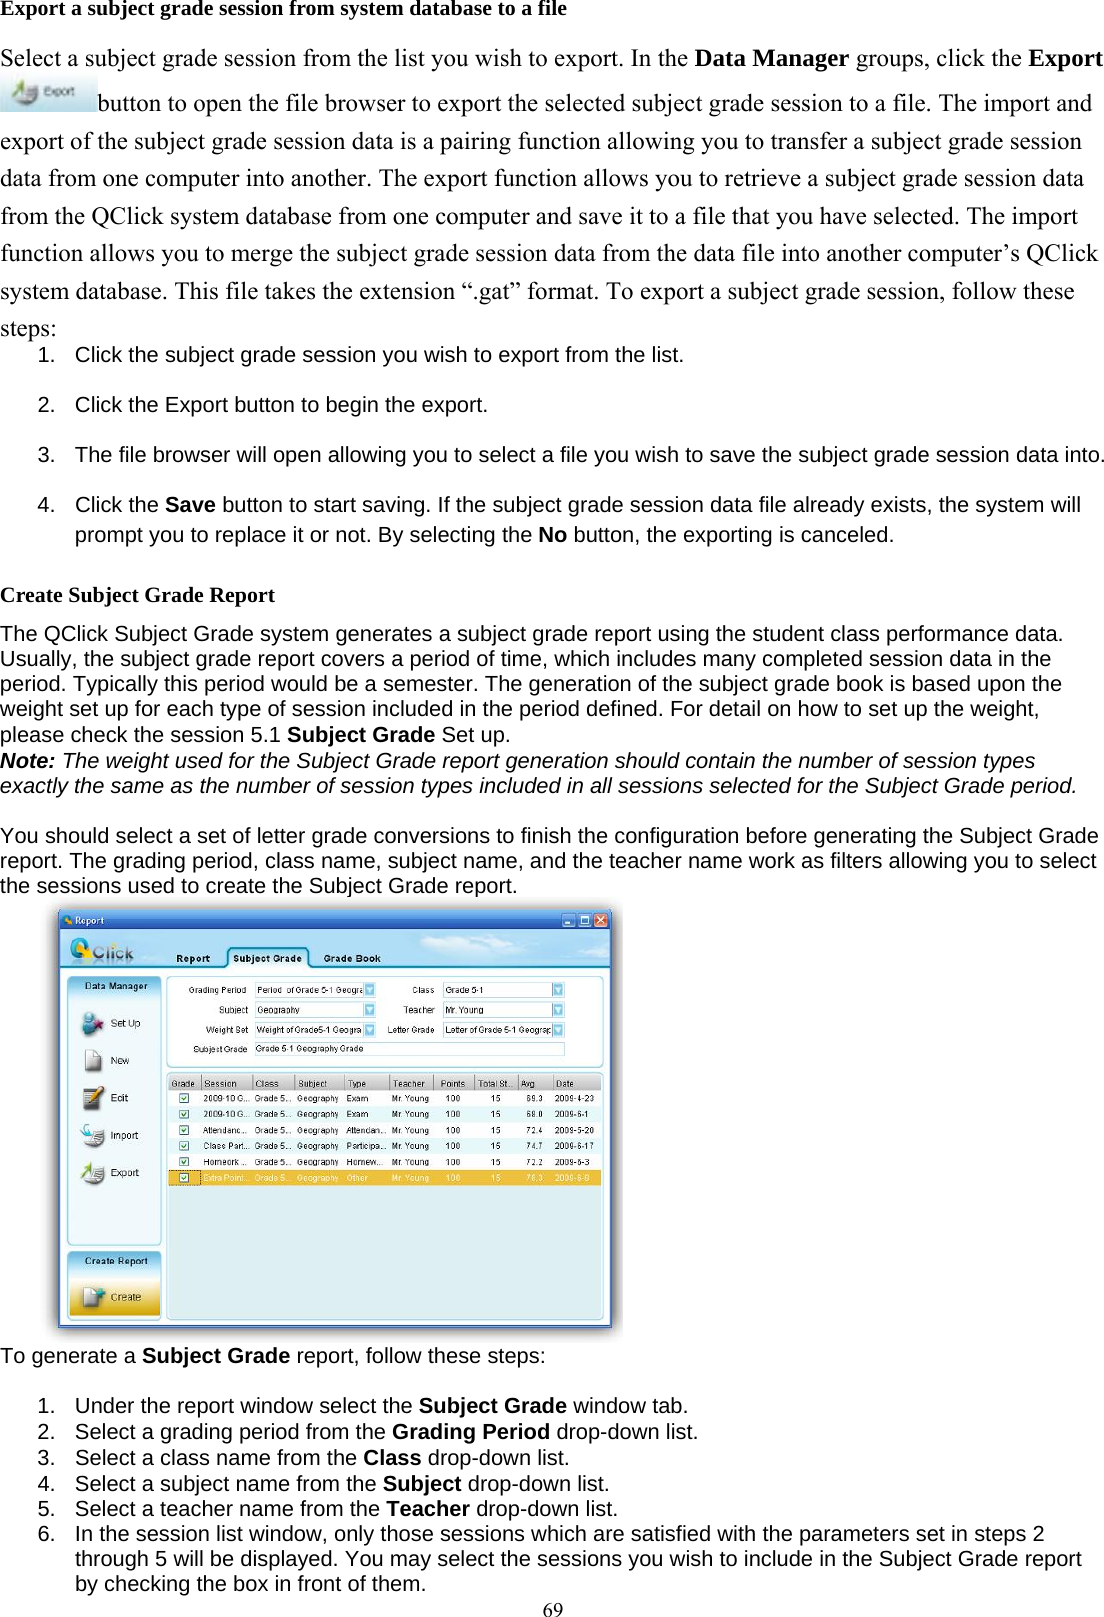  69Export a subject grade session from system database to a file Select a subject grade session from the list you wish to export. In the Data Manager groups, click the Export button to open the file browser to export the selected subject grade session to a file. The import and export of the subject grade session data is a pairing function allowing you to transfer a subject grade session data from one computer into another. The export function allows you to retrieve a subject grade session data from the QClick system database from one computer and save it to a file that you have selected. The import function allows you to merge the subject grade session data from the data file into another computer’s QClick system database. This file takes the extension “.gat” format. To export a subject grade session, follow these steps: 1.  Click the subject grade session you wish to export from the list. 2.  Click the Export button to begin the export. 3.  The file browser will open allowing you to select a file you wish to save the subject grade session data into. 4. Click the Save button to start saving. If the subject grade session data file already exists, the system will prompt you to replace it or not. By selecting the No button, the exporting is canceled. Create Subject Grade Report The QClick Subject Grade system generates a subject grade report using the student class performance data. Usually, the subject grade report covers a period of time, which includes many completed session data in the period. Typically this period would be a semester. The generation of the subject grade book is based upon the weight set up for each type of session included in the period defined. For detail on how to set up the weight, please check the session 5.1 Subject Grade Set up.   Note: The weight used for the Subject Grade report generation should contain the number of session types exactly the same as the number of session types included in all sessions selected for the Subject Grade period.   You should select a set of letter grade conversions to finish the configuration before generating the Subject Grade report. The grading period, class name, subject name, and the teacher name work as filters allowing you to select the sessions used to create the Subject Grade report.  To generate a Subject Grade report, follow these steps:  1.  Under the report window select the Subject Grade window tab. 2.  Select a grading period from the Grading Period drop-down list. 3.  Select a class name from the Class drop-down list. 4.  Select a subject name from the Subject drop-down list. 5.  Select a teacher name from the Teacher drop-down list. 6.  In the session list window, only those sessions which are satisfied with the parameters set in steps 2 through 5 will be displayed. You may select the sessions you wish to include in the Subject Grade report by checking the box in front of them. 